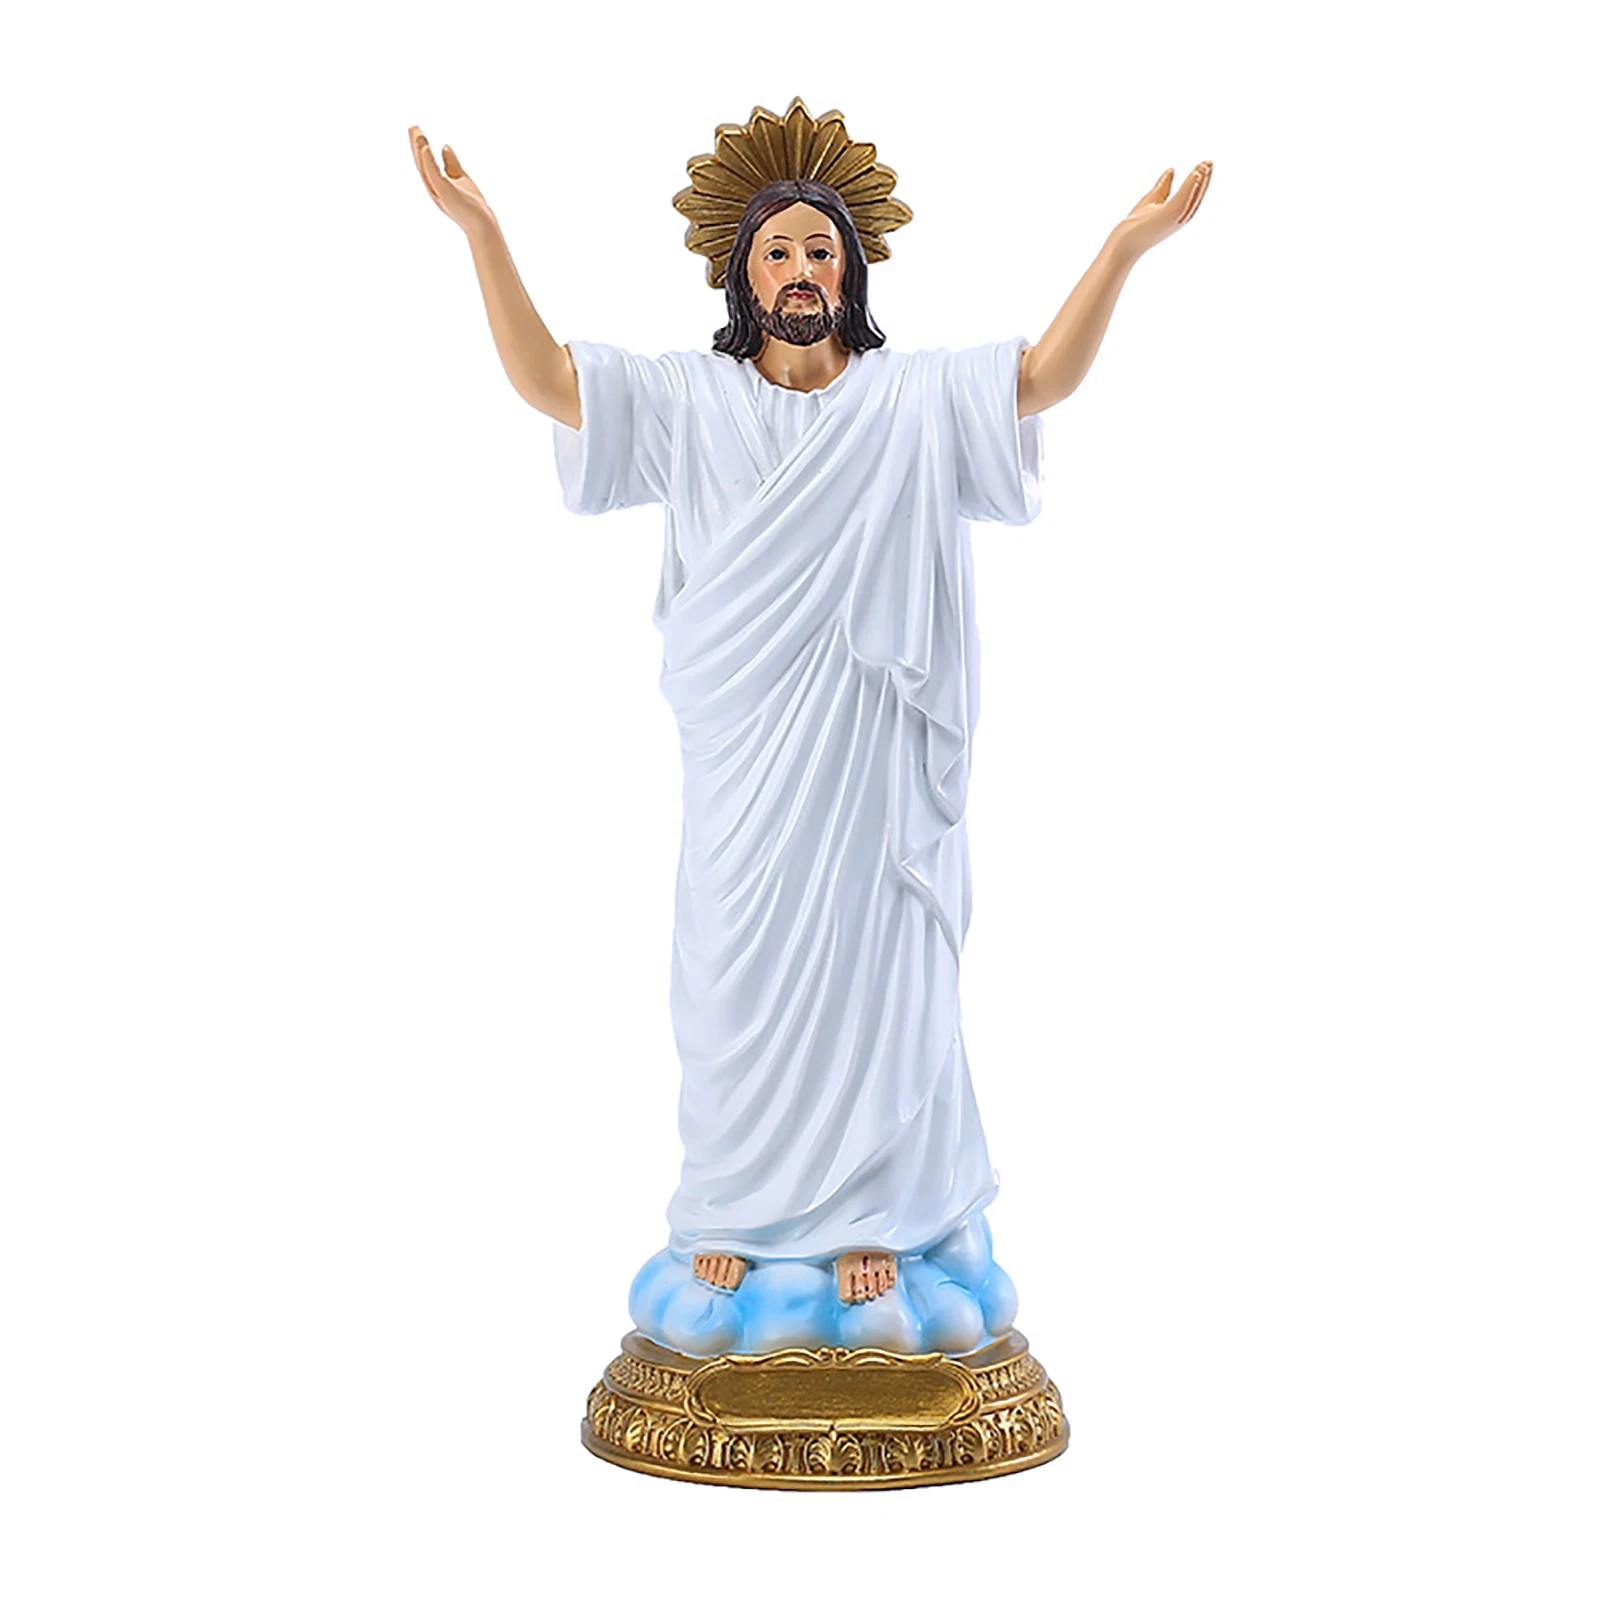 

8.85 Inch Jesus Statues And Figurines Sacred Jesus With Open Arms Spiritual Decorations And Religious Gifts Resin Statue White